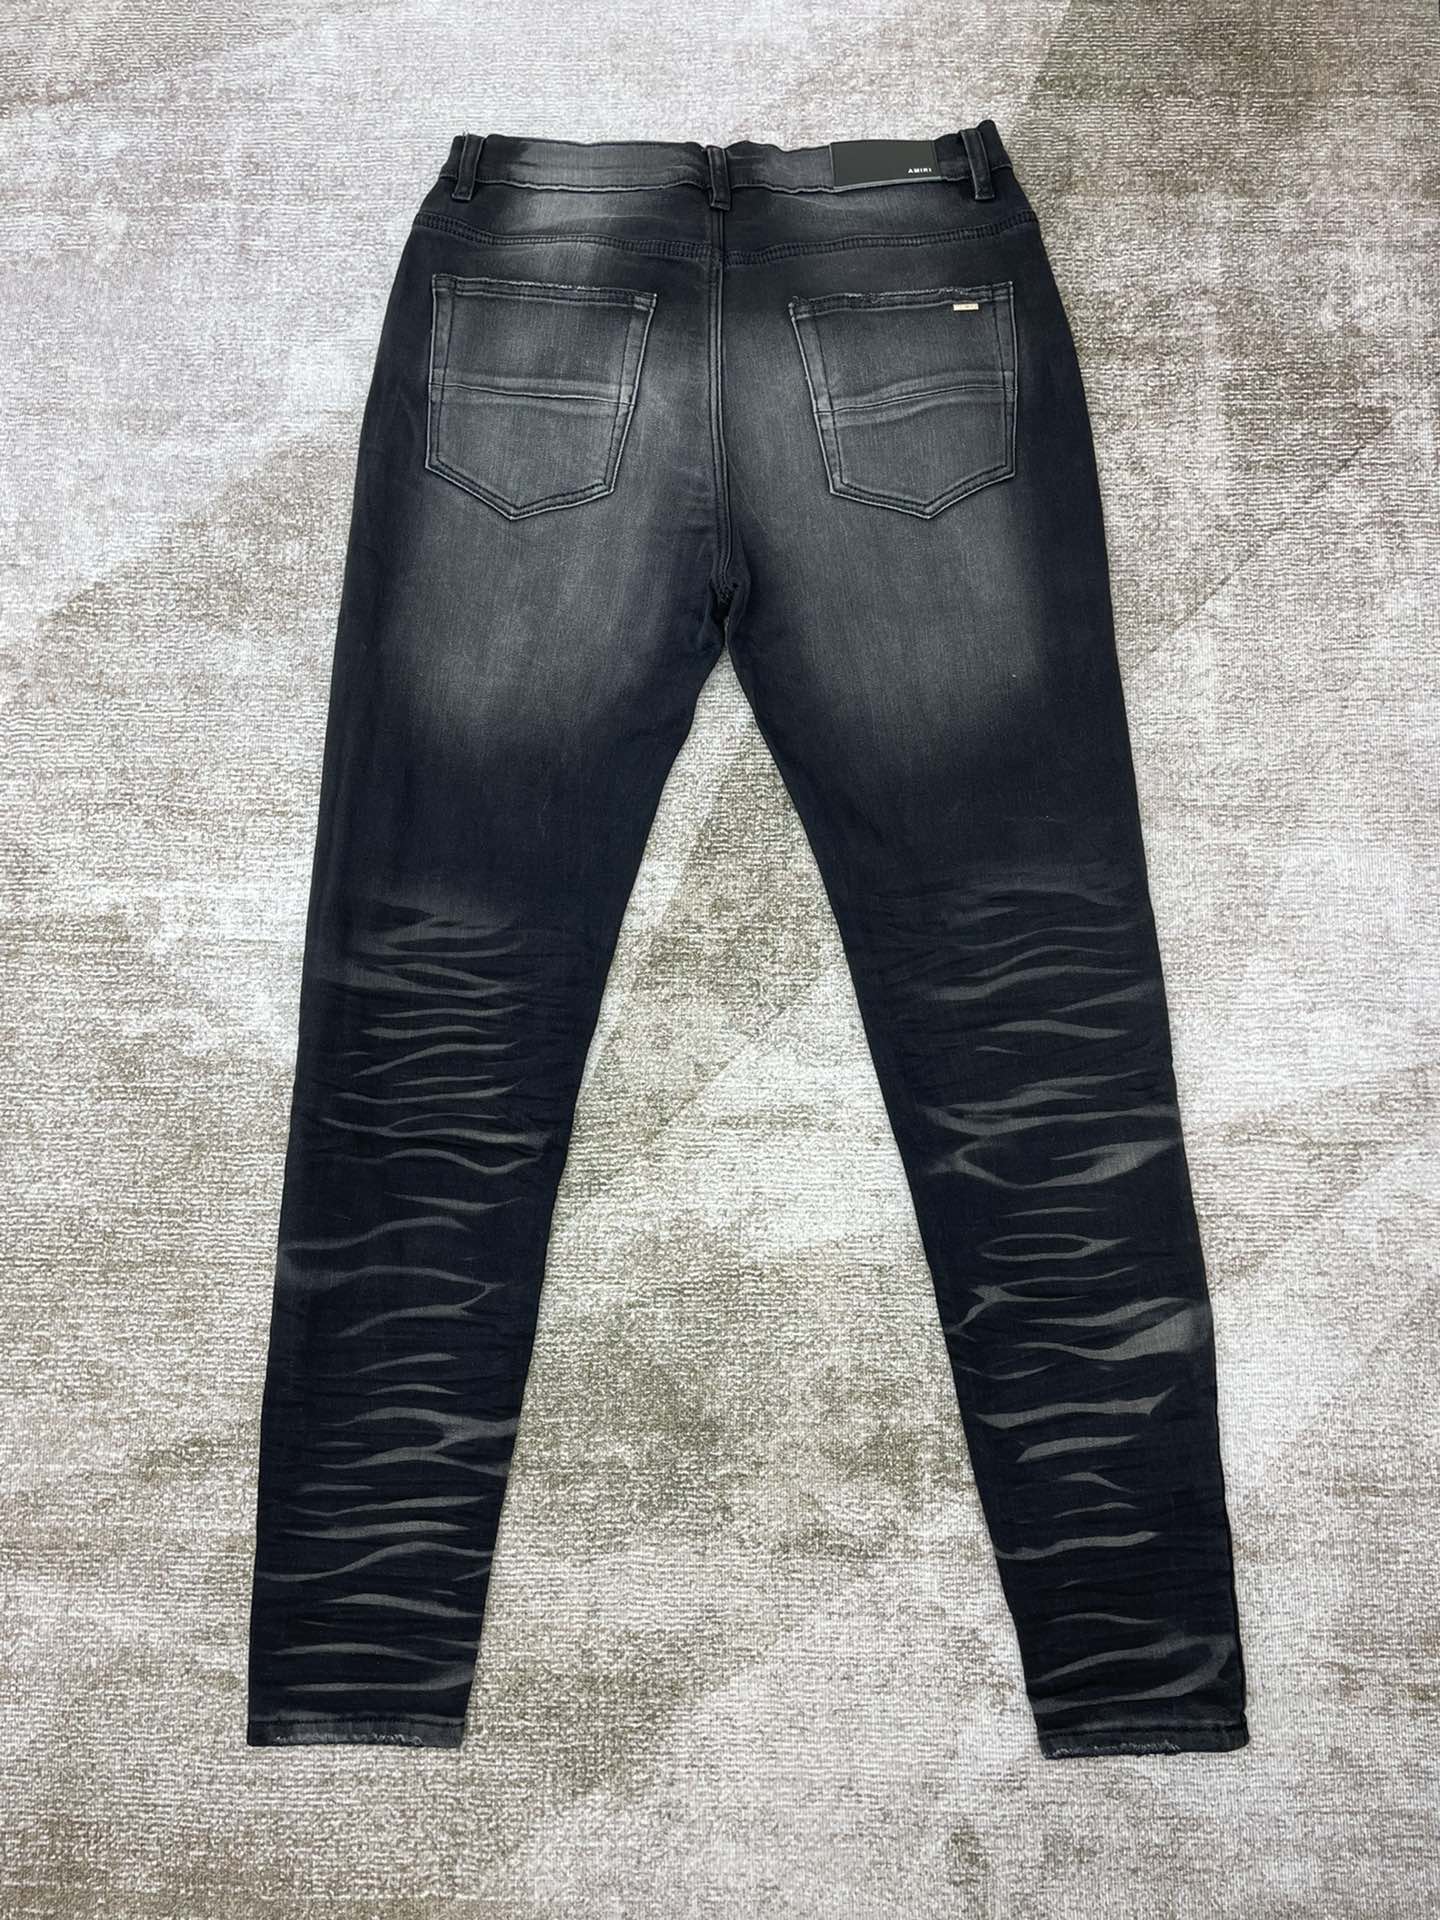 US$ 125.10 - 1:1 quality version Basic Black and Gray Jeans - www.repdog.cn